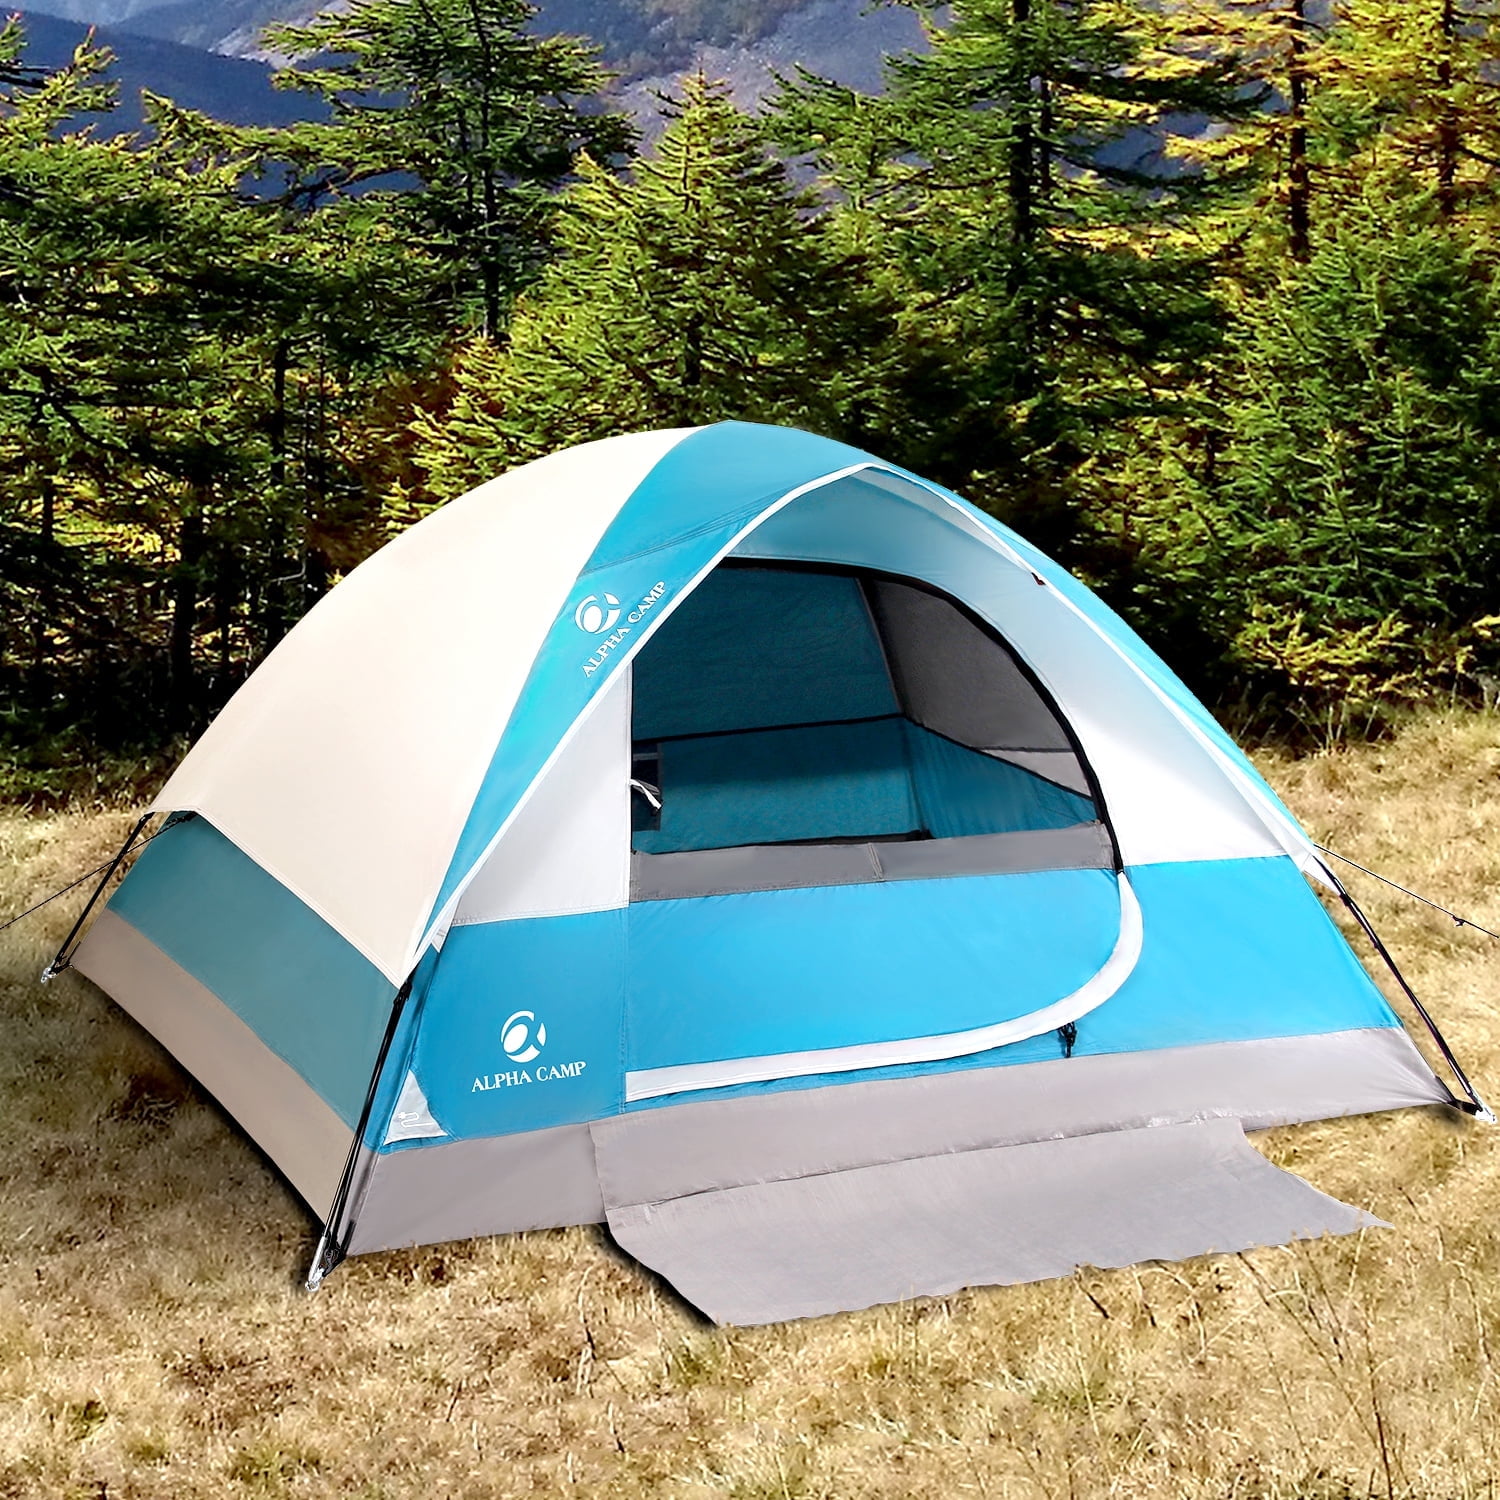 Alpha Camper 2-Person Camping Dome Tent Waterproof Portable Tent with Carry  Bag, Blue 